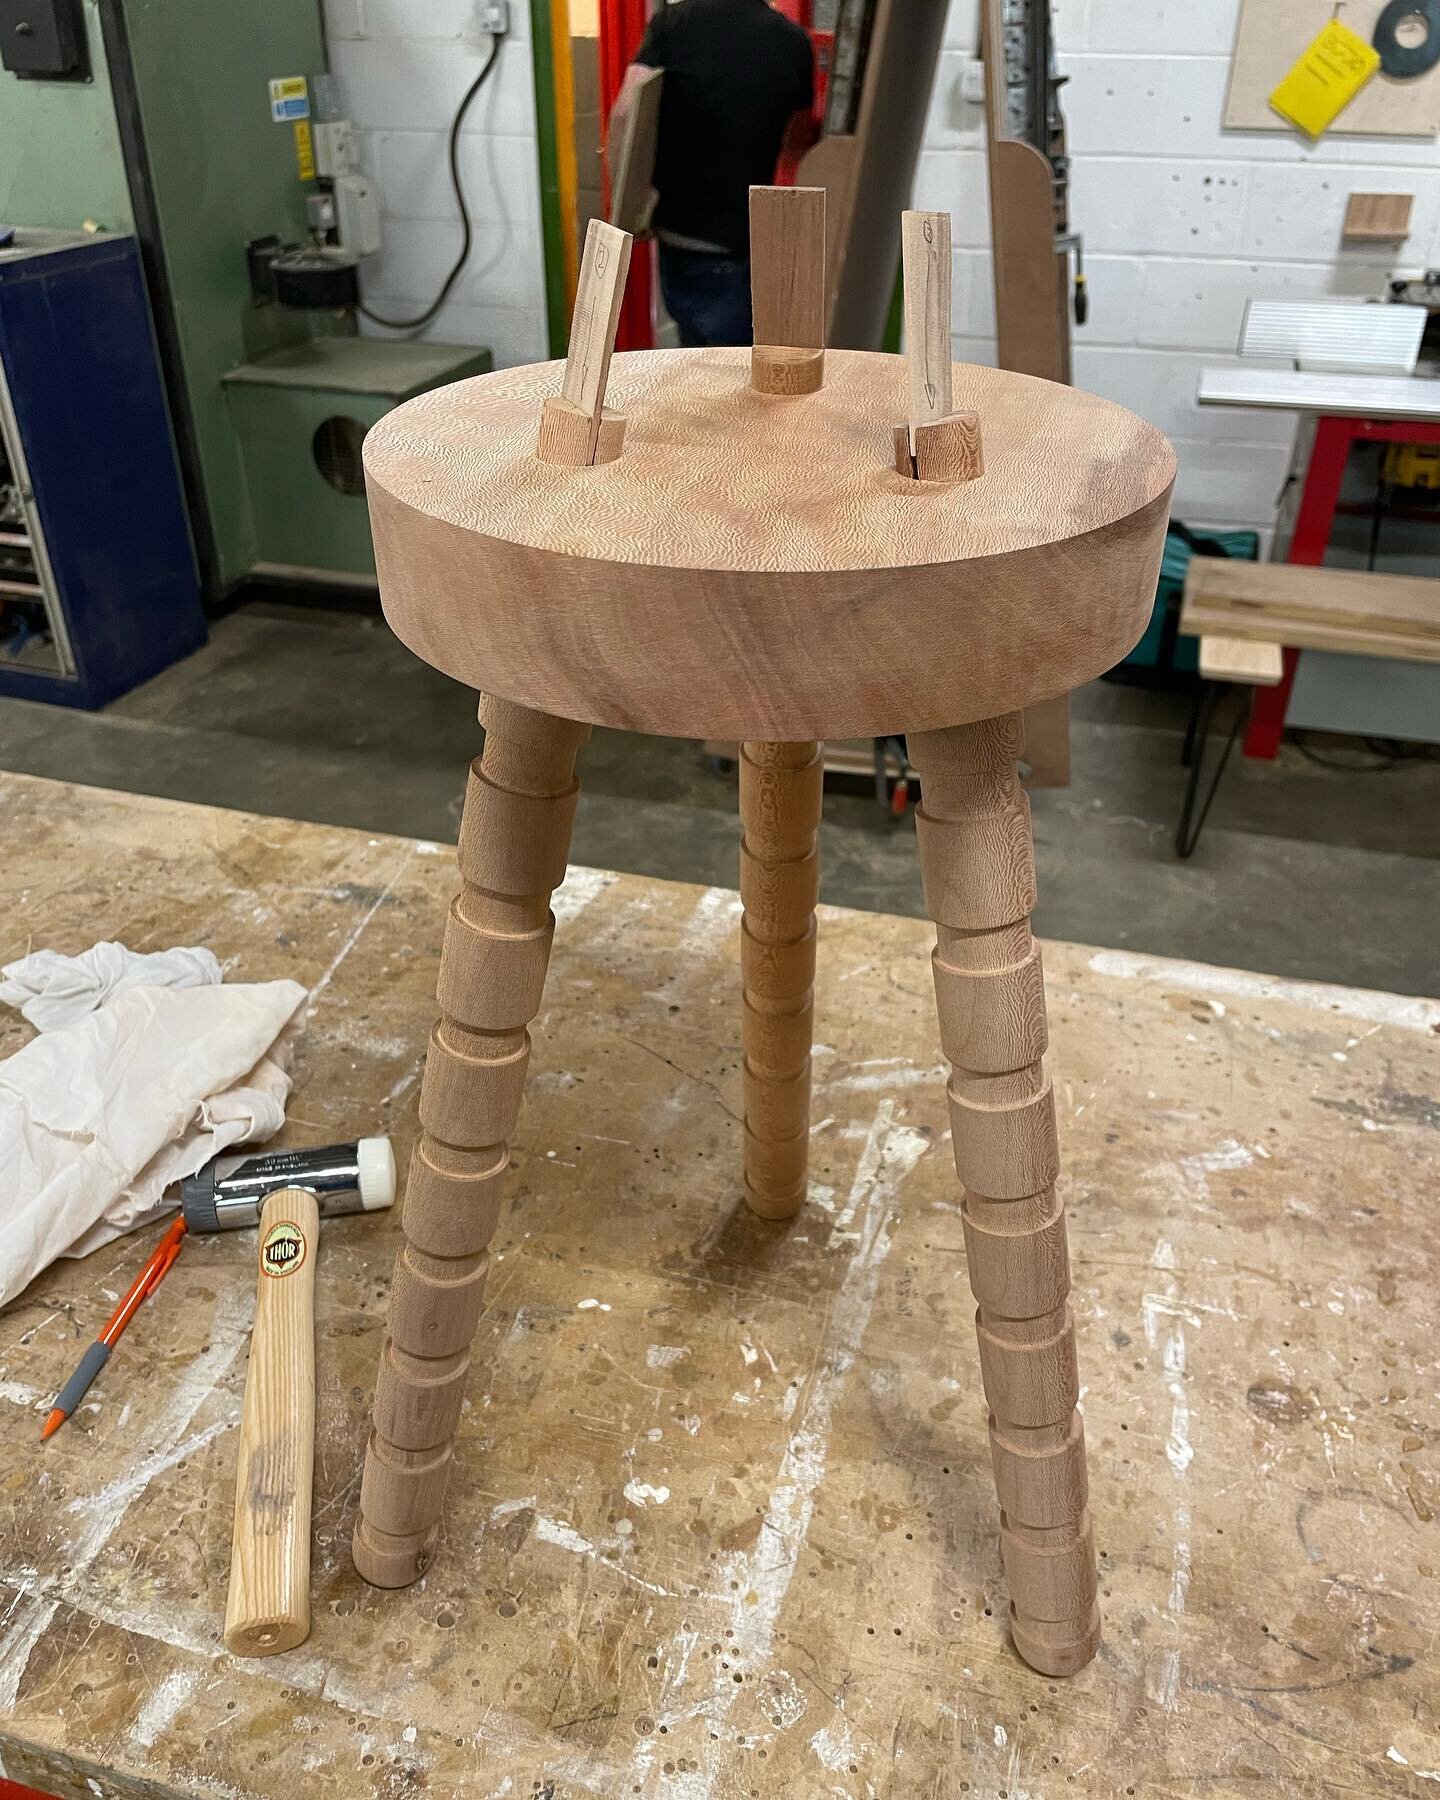 Final stages of making my London Plane stool. 

I used walnut to make the wedged mortise and tenon joints. Everything else is timber all cut from the same fallen tree in Denmark Hill, south london. 

I used an osmo hard wax oil for the finish to try 